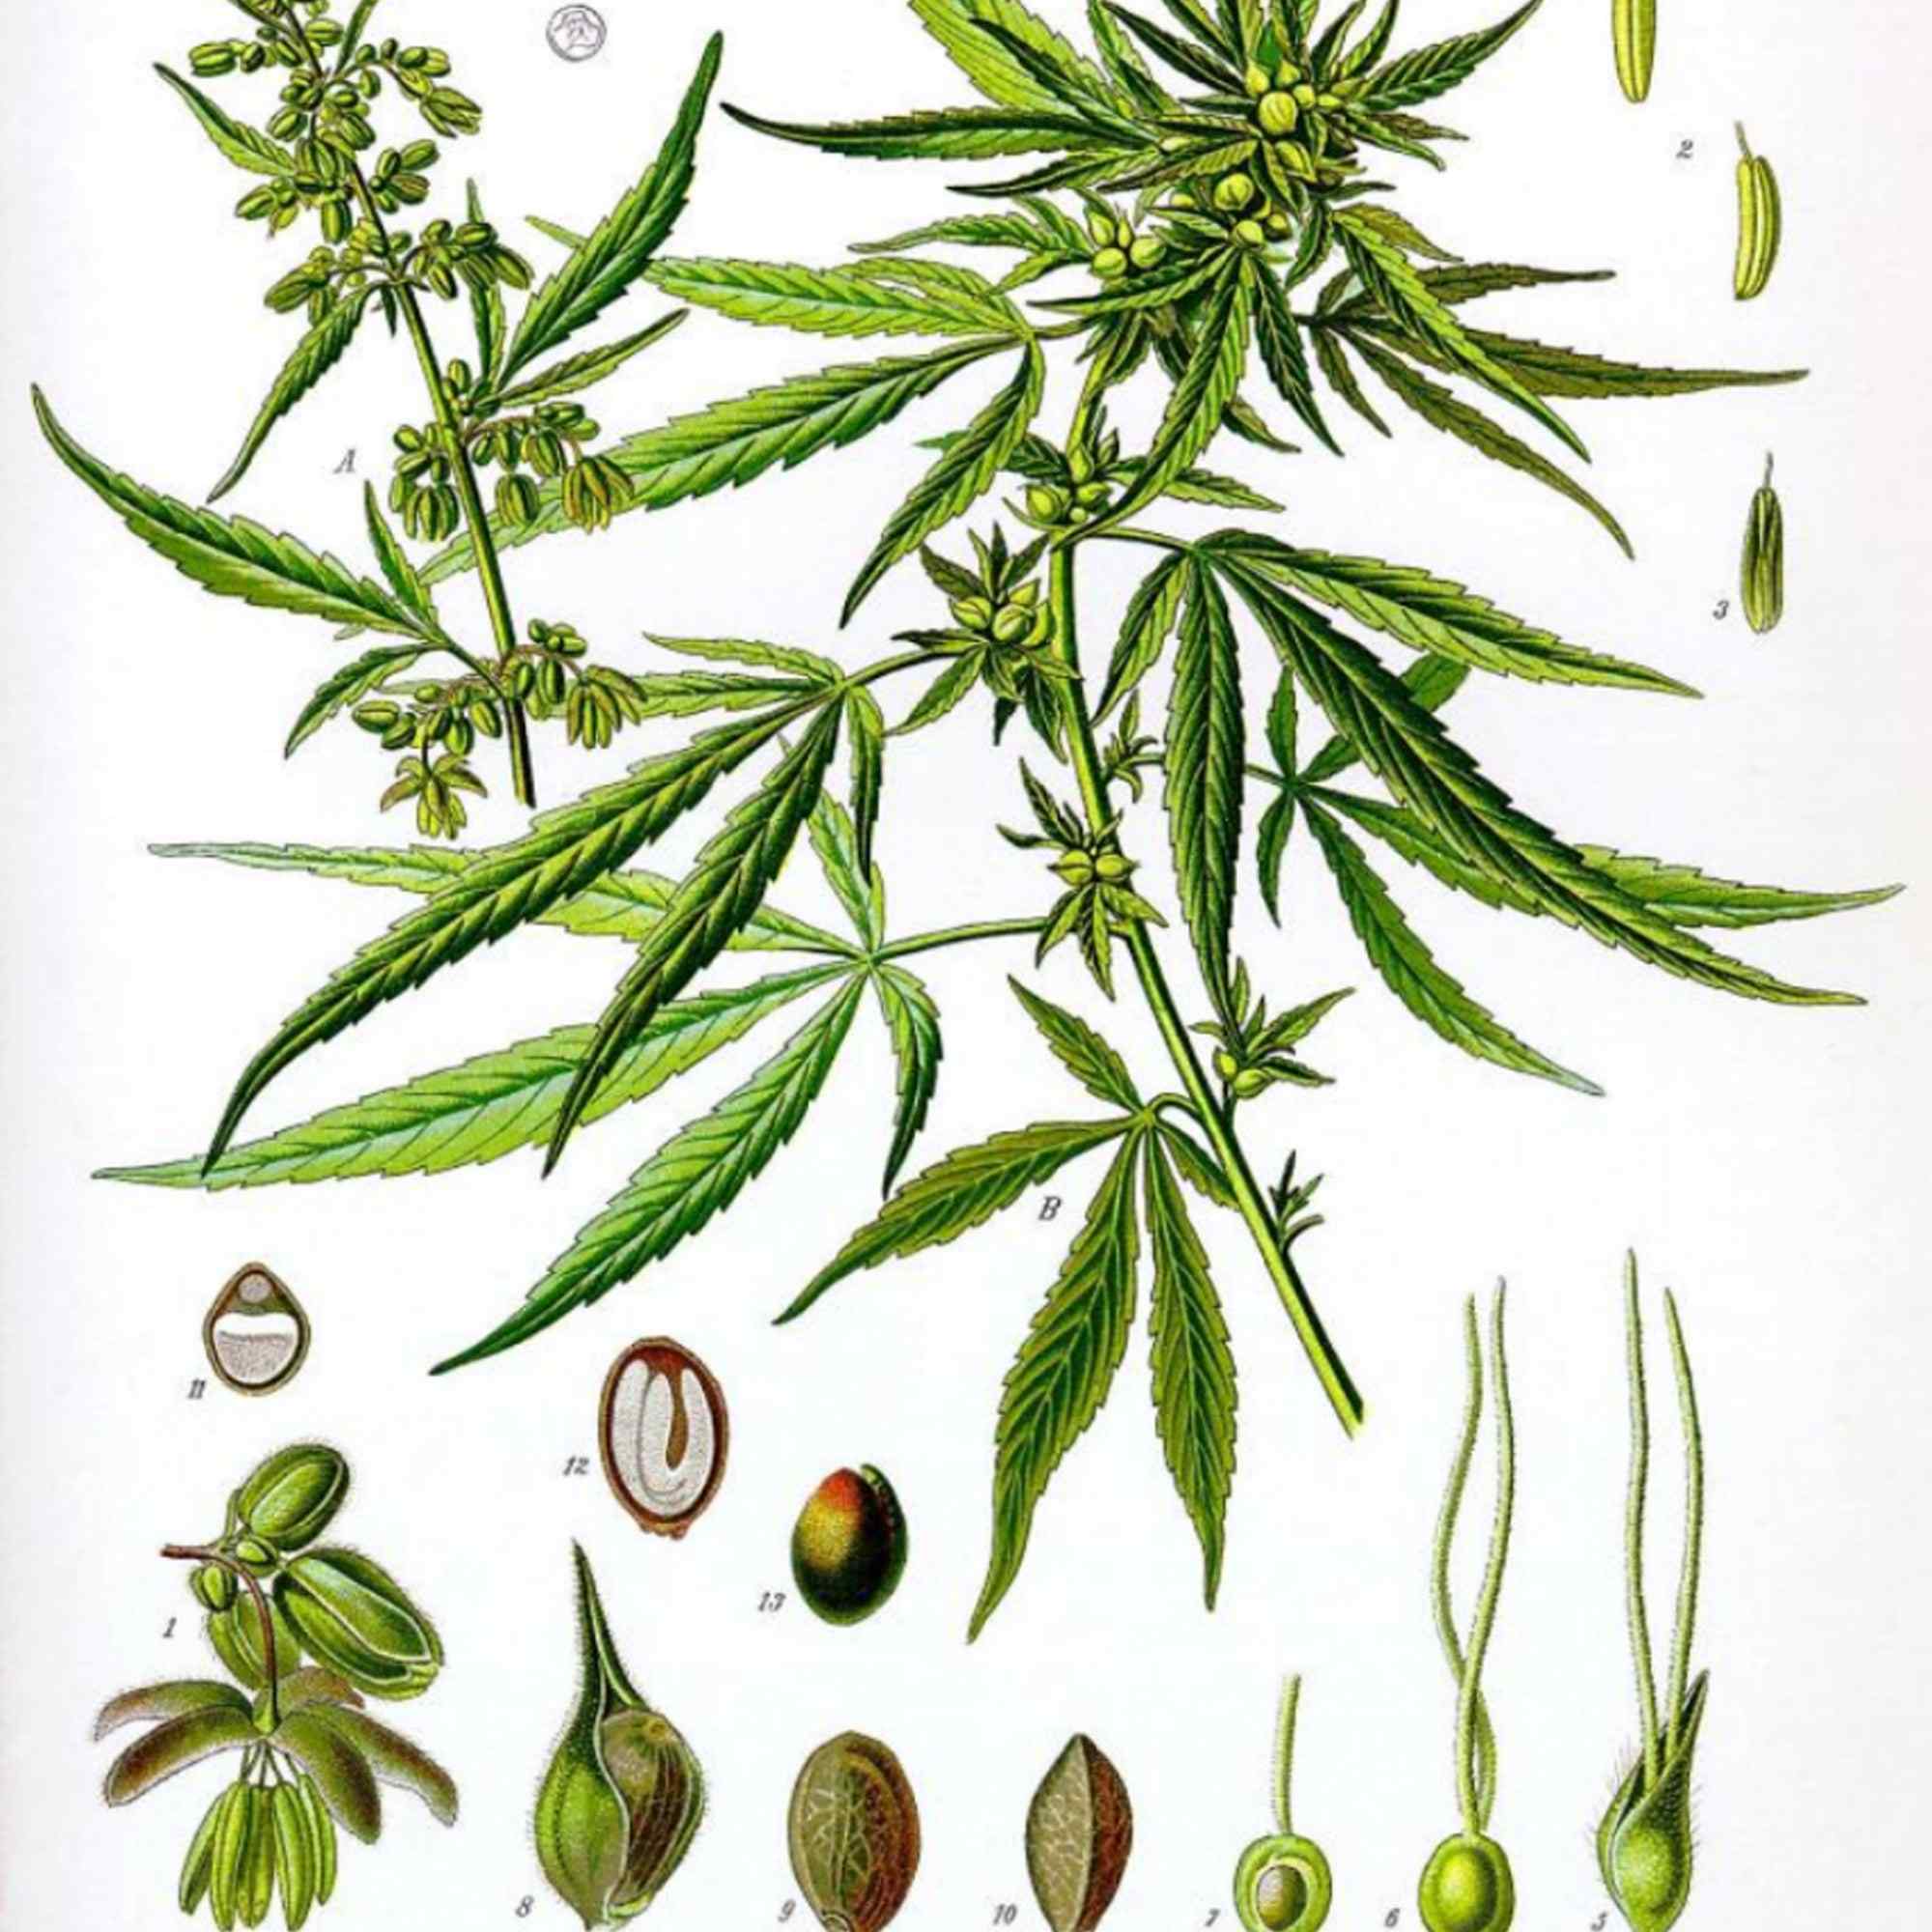 The history of cannabis - part 3